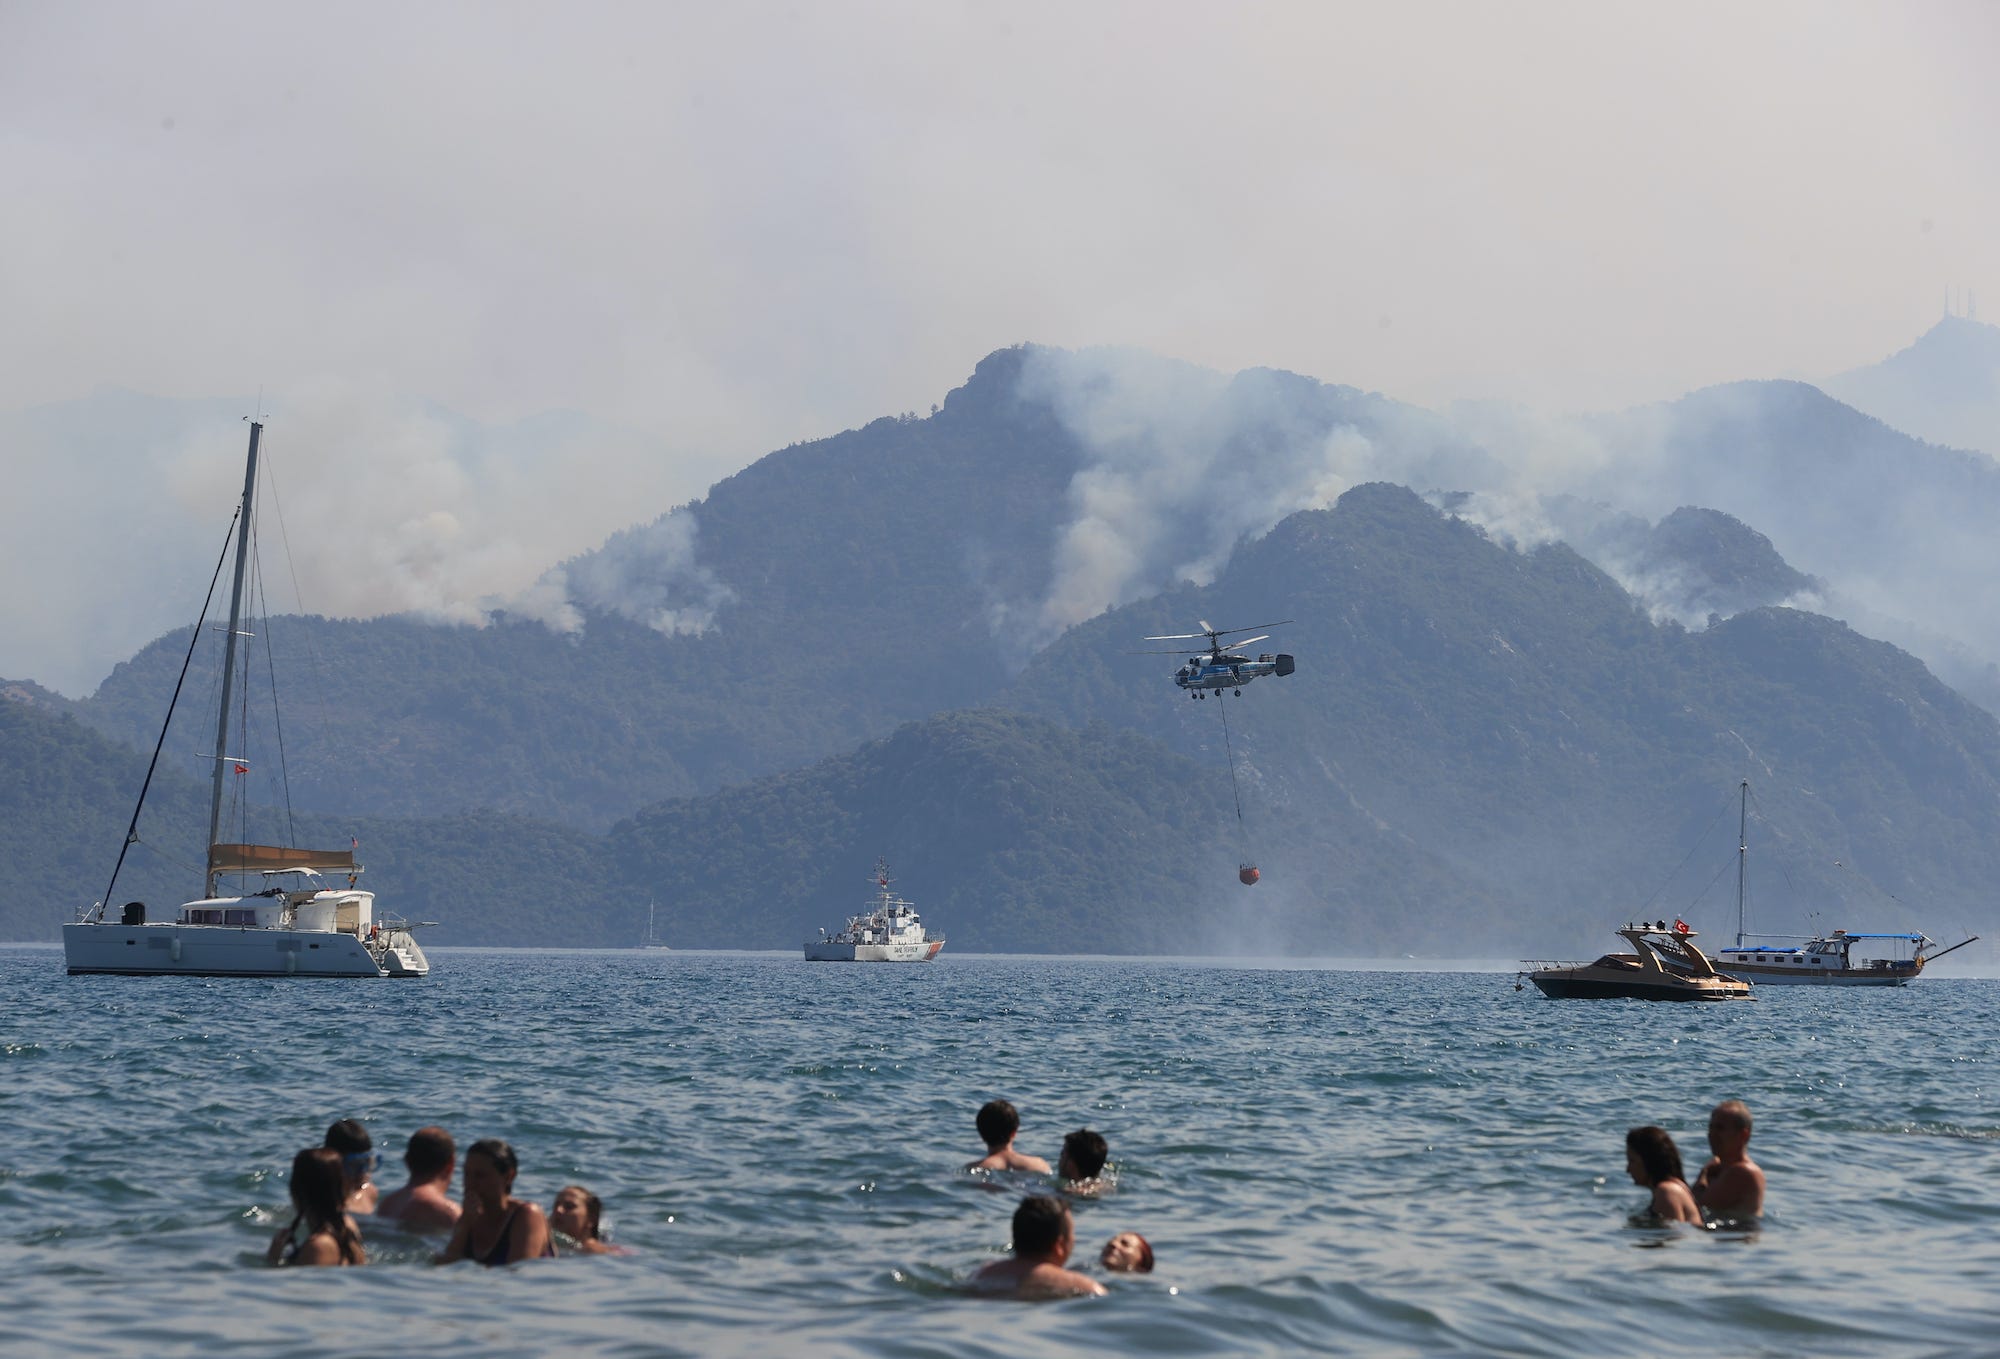 People in the water looking at a hill with smoke rising